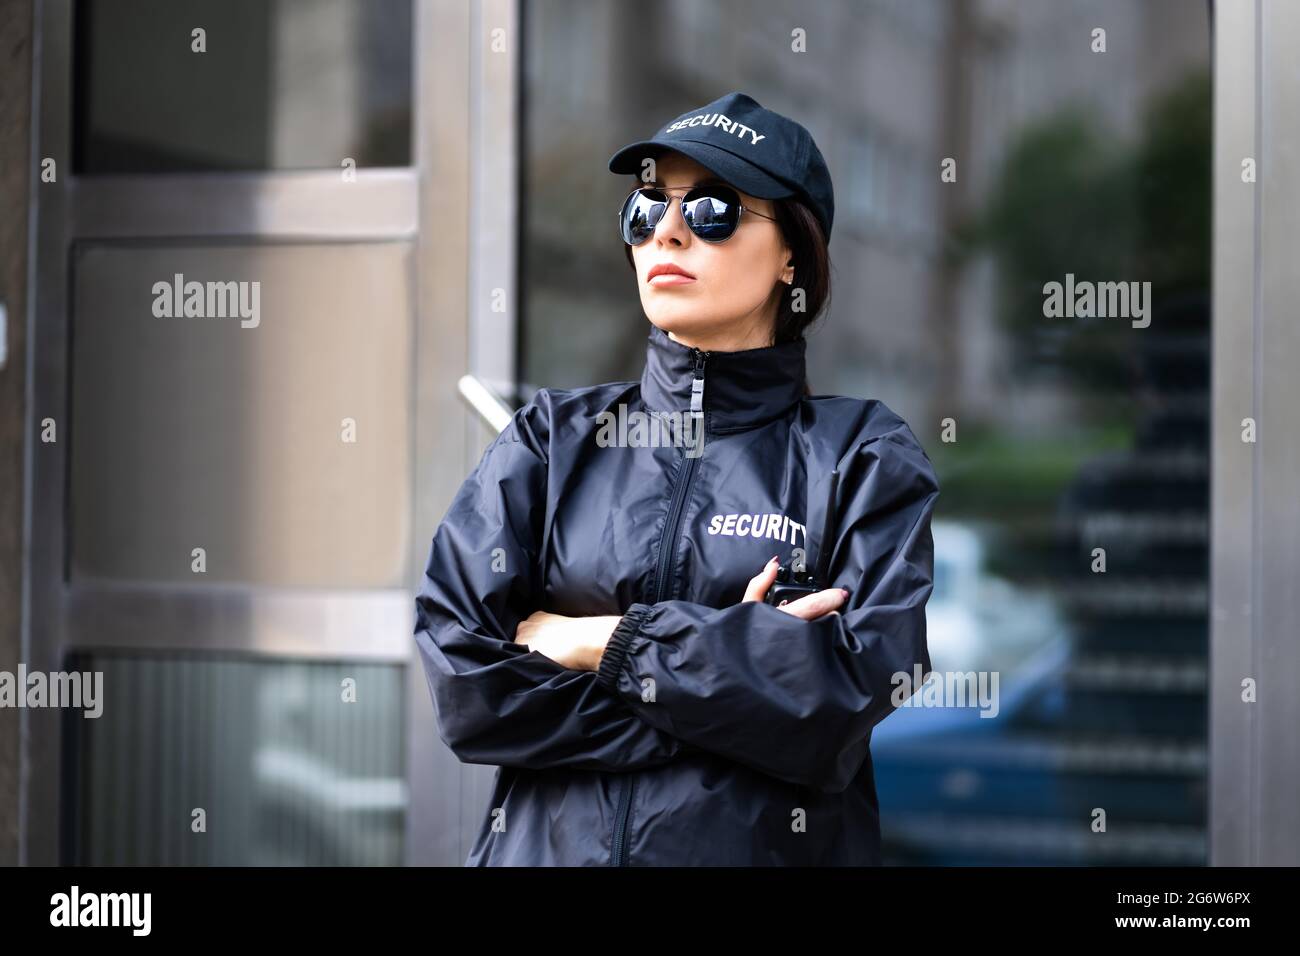 Security Guard Officer In Uniform Guard Service Woman Standing Stock